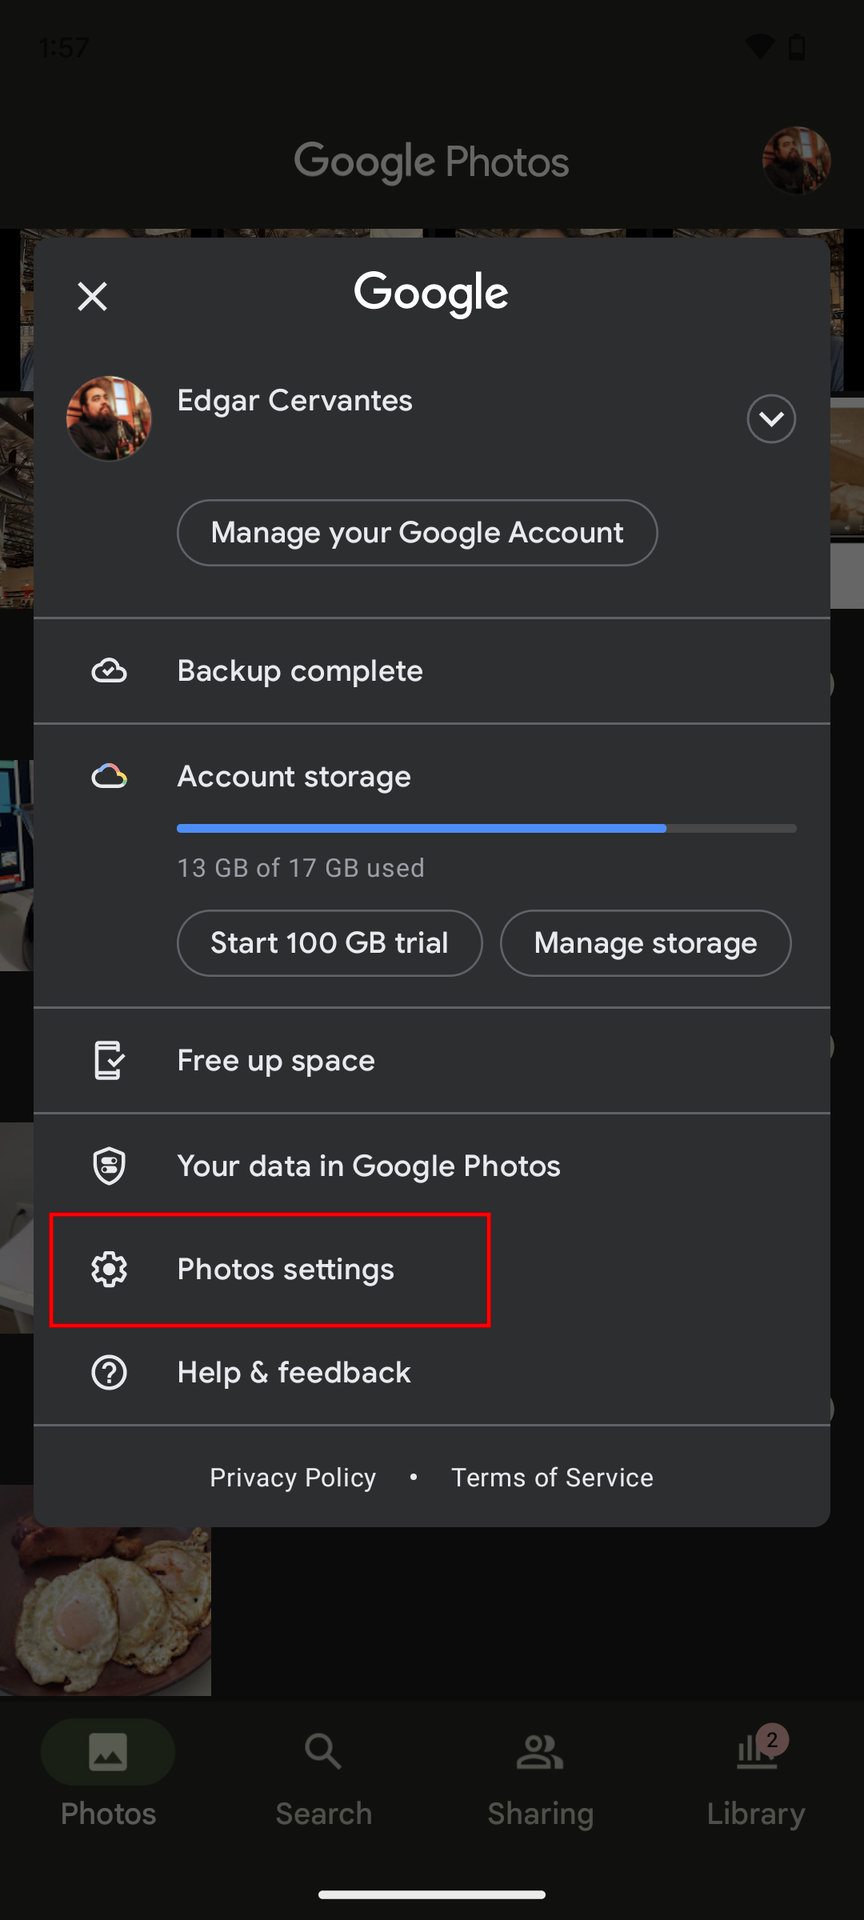 How to sync your images to Google Photos 2